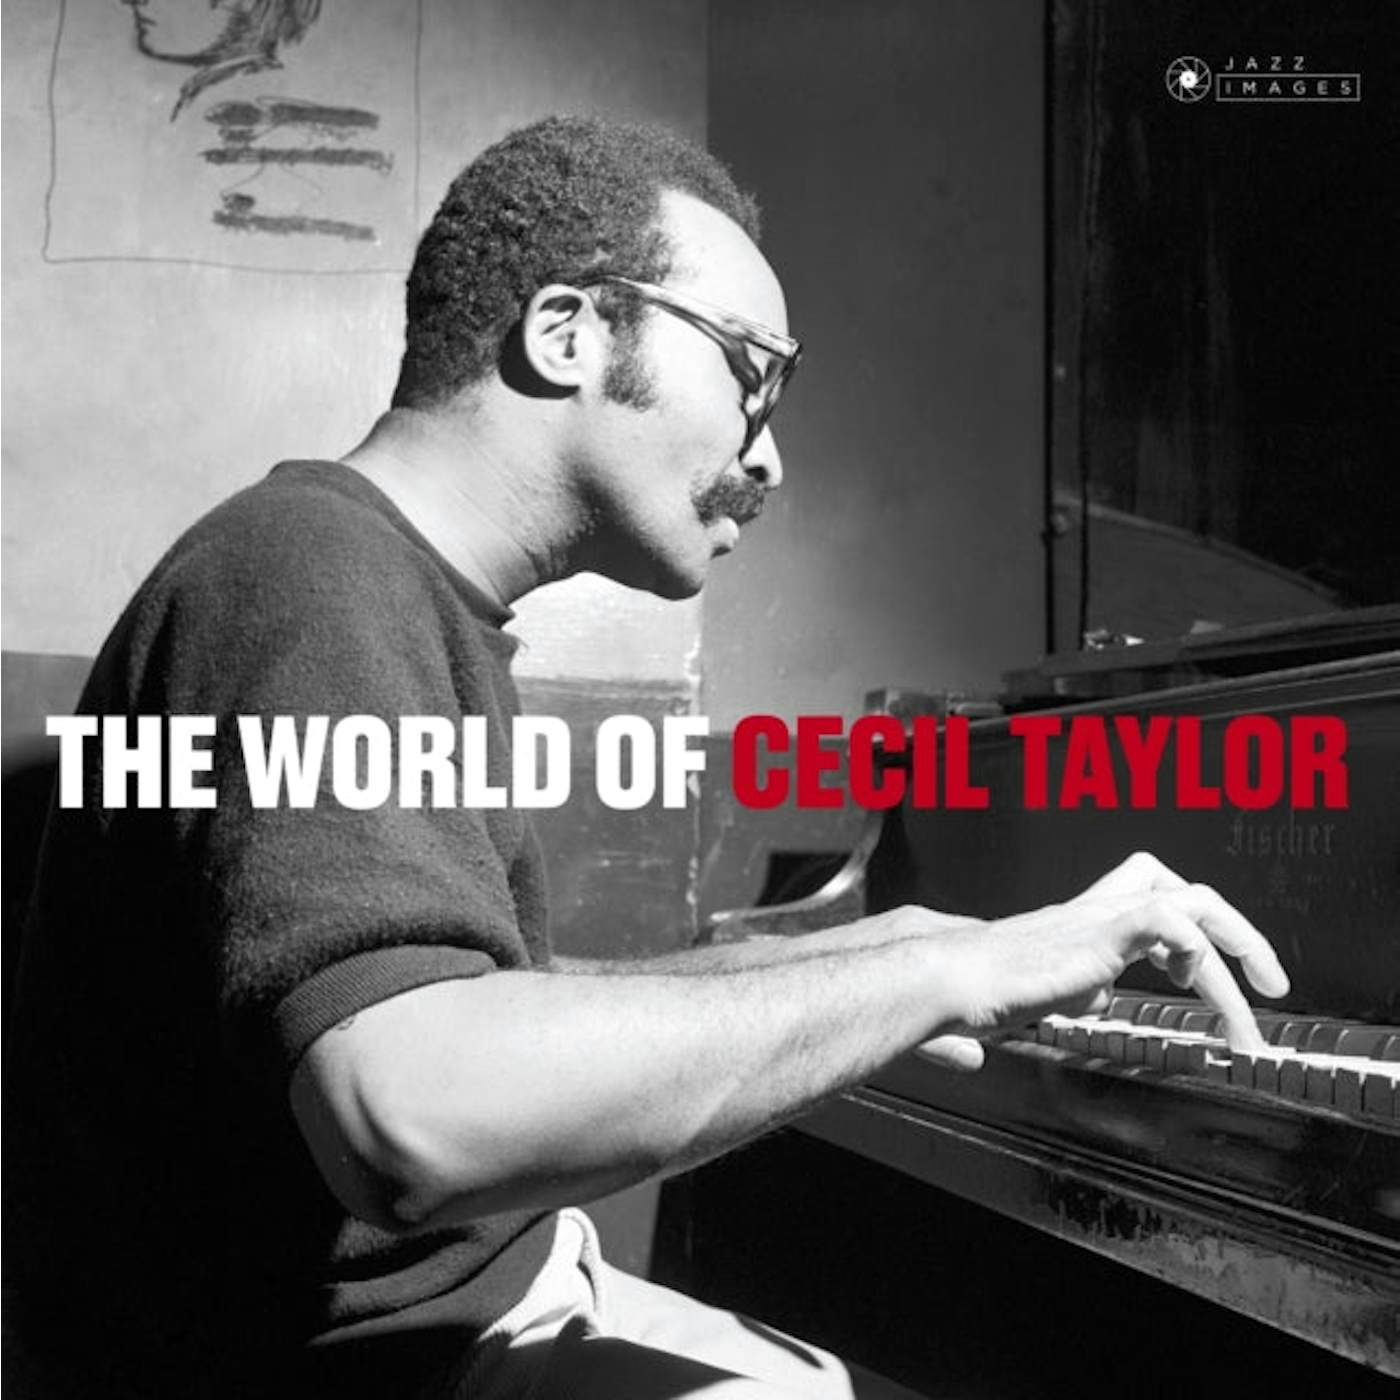 Cecil Taylor LP Vinyl Record - The World Of Cecil Taylor